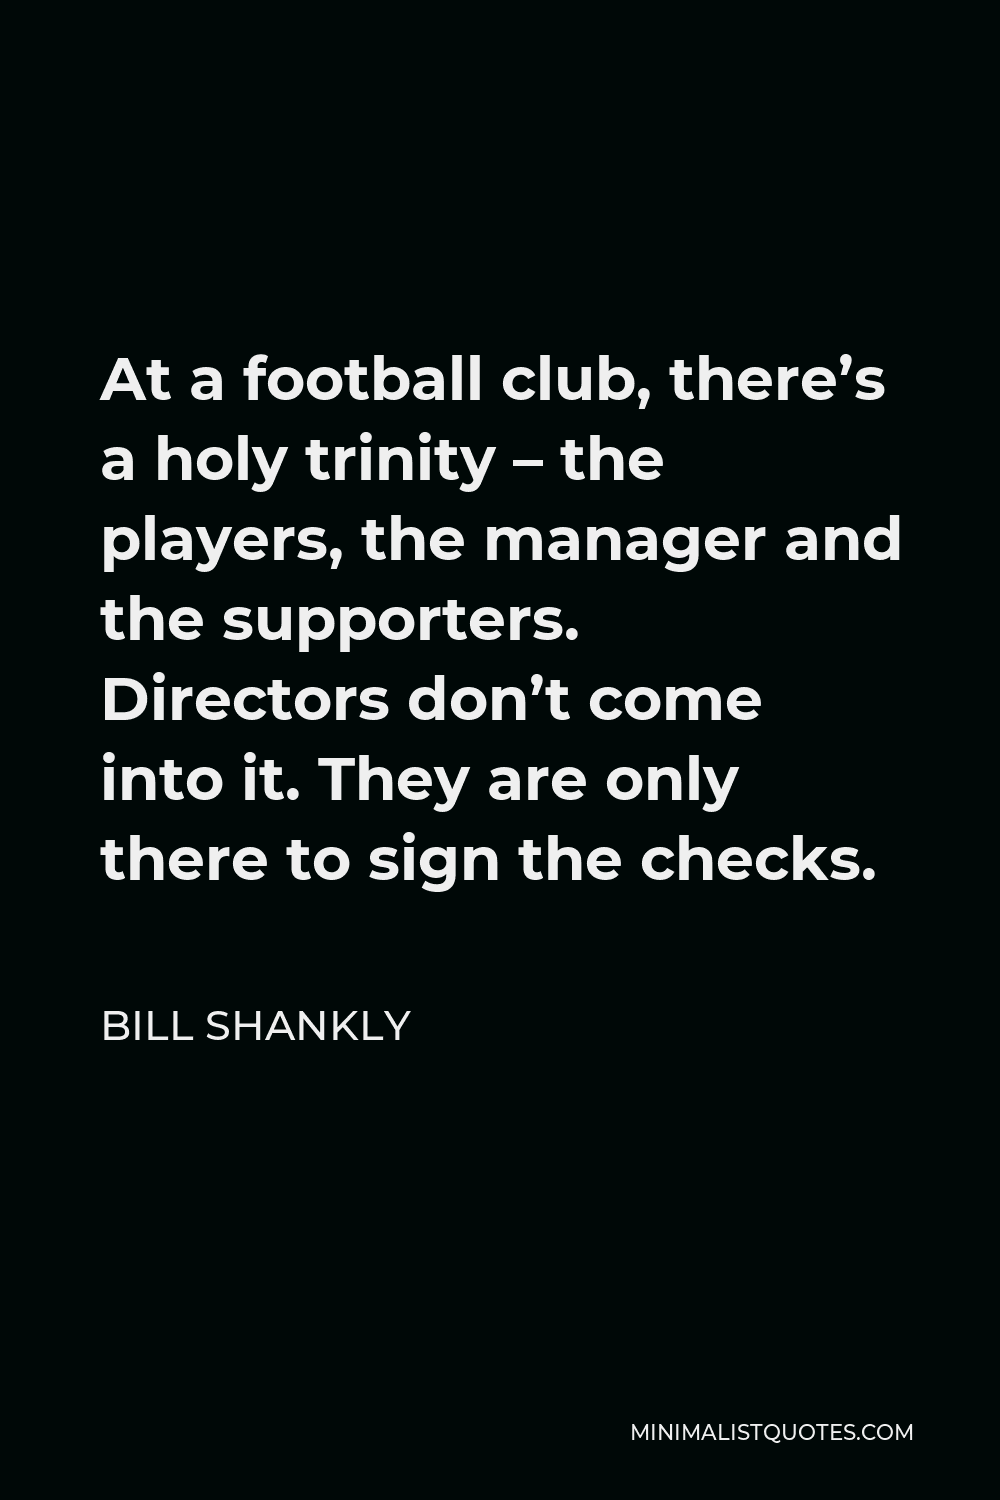 Bill Shankly Quote - At a football club, there’s a holy trinity – the players, the manager and the supporters. Directors don’t come into it. They are only there to sign the checks.